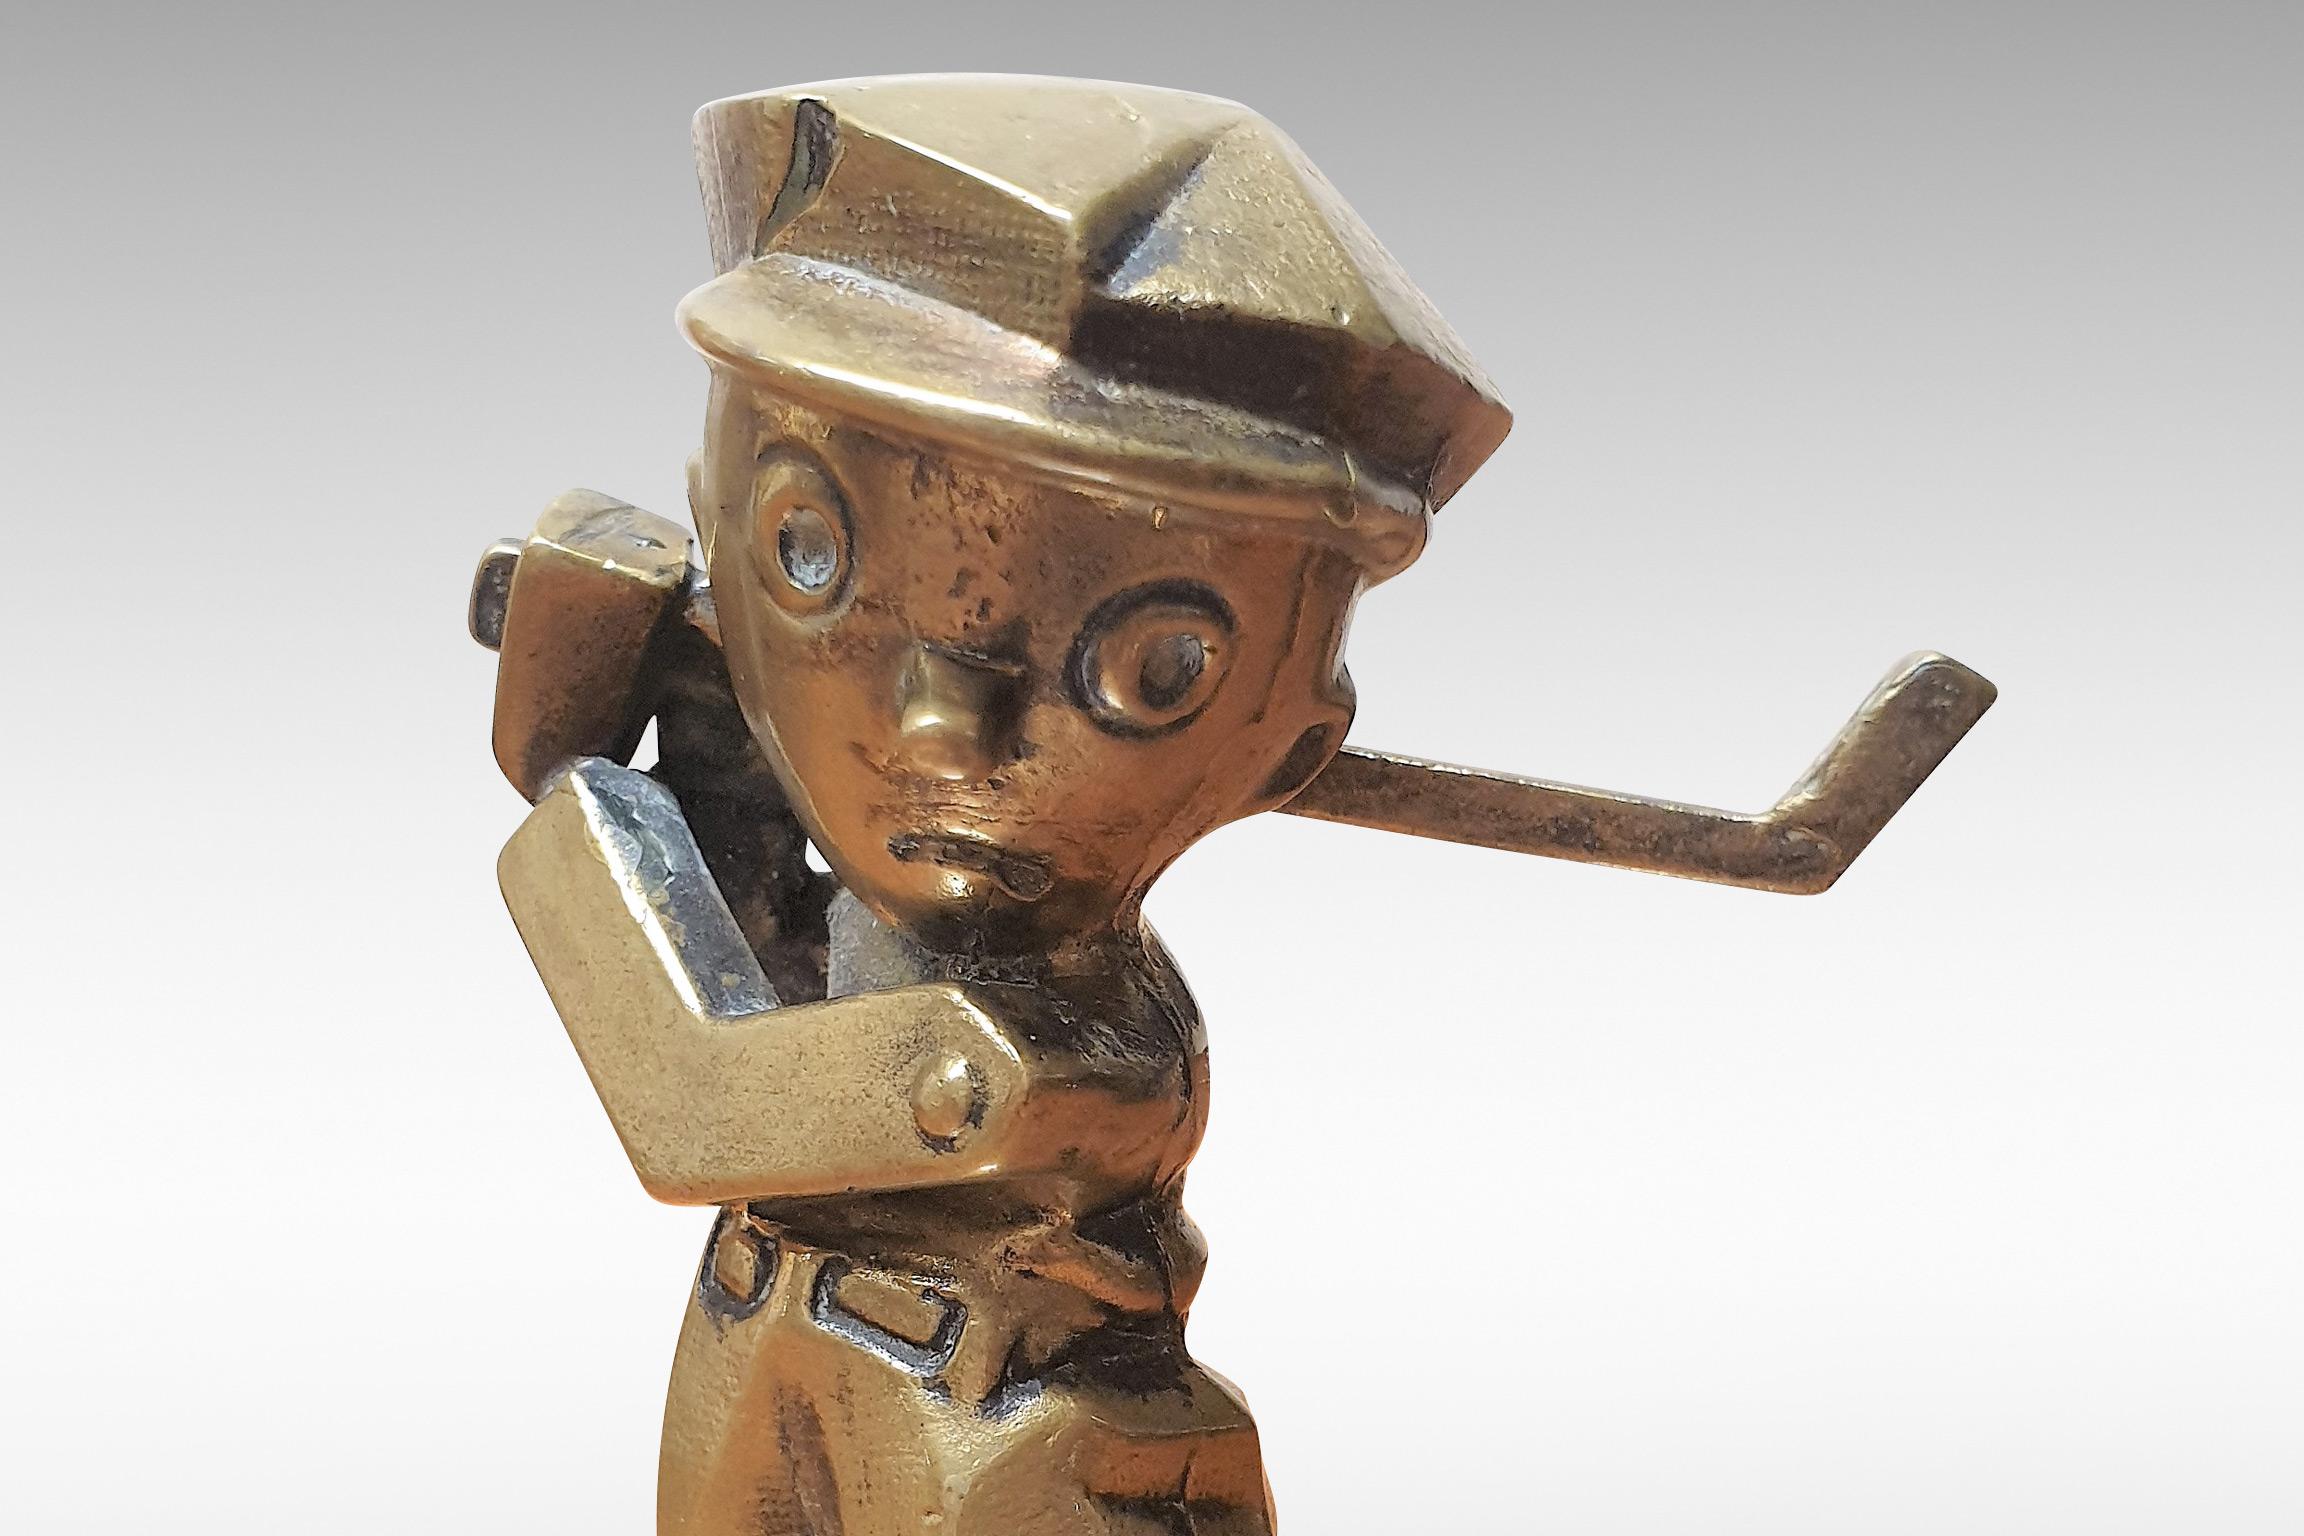 An original golfer car mascot based on the puppet Pinocchio immortalized by the 1940 Disney film.